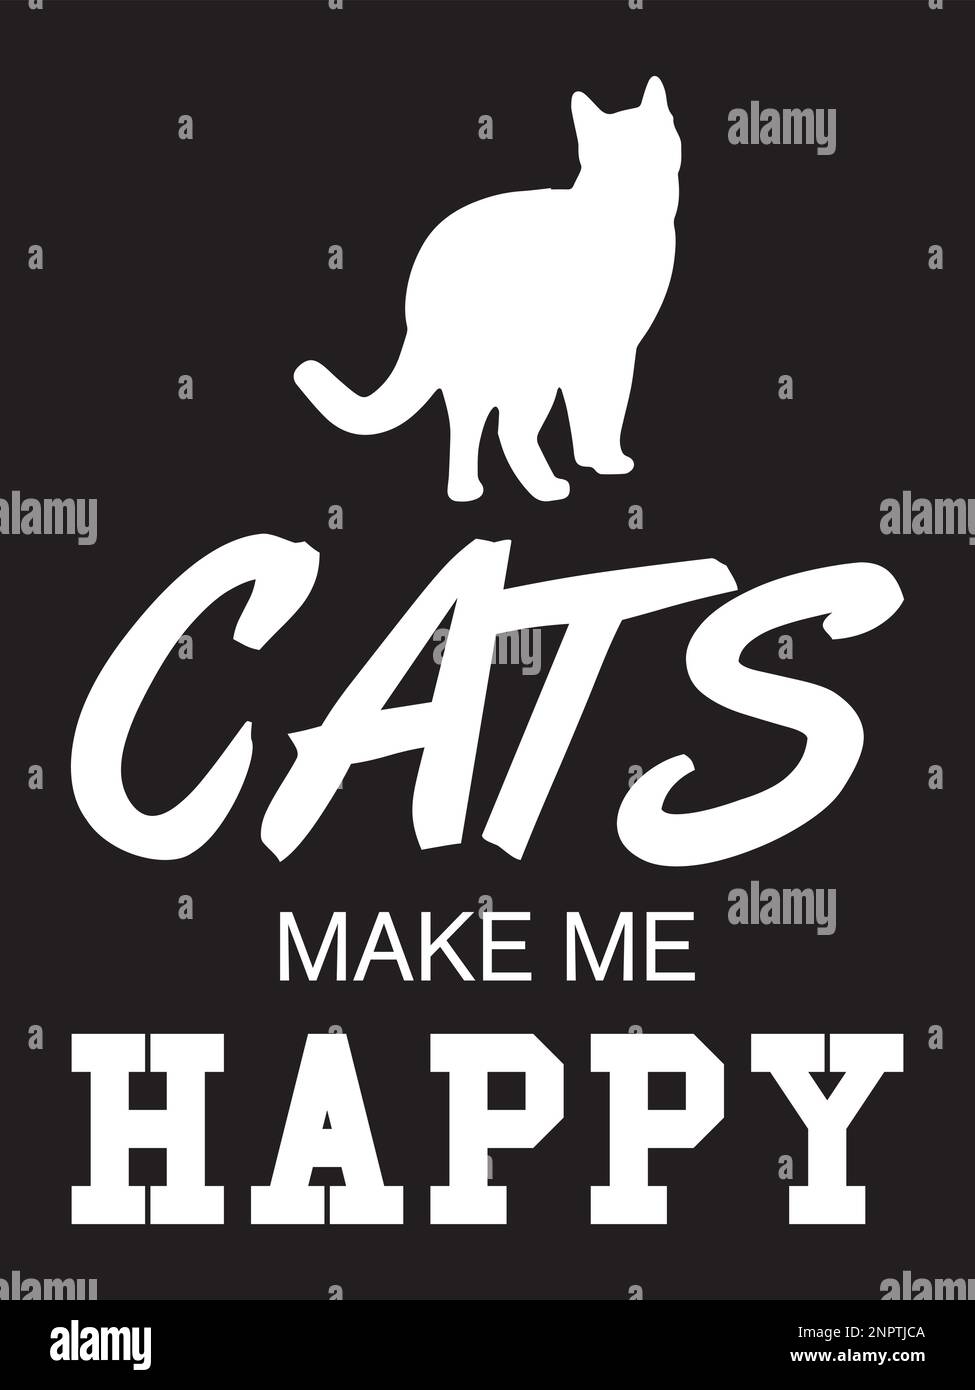 Cats make me happy design with a cat silhouette. Stock Vector